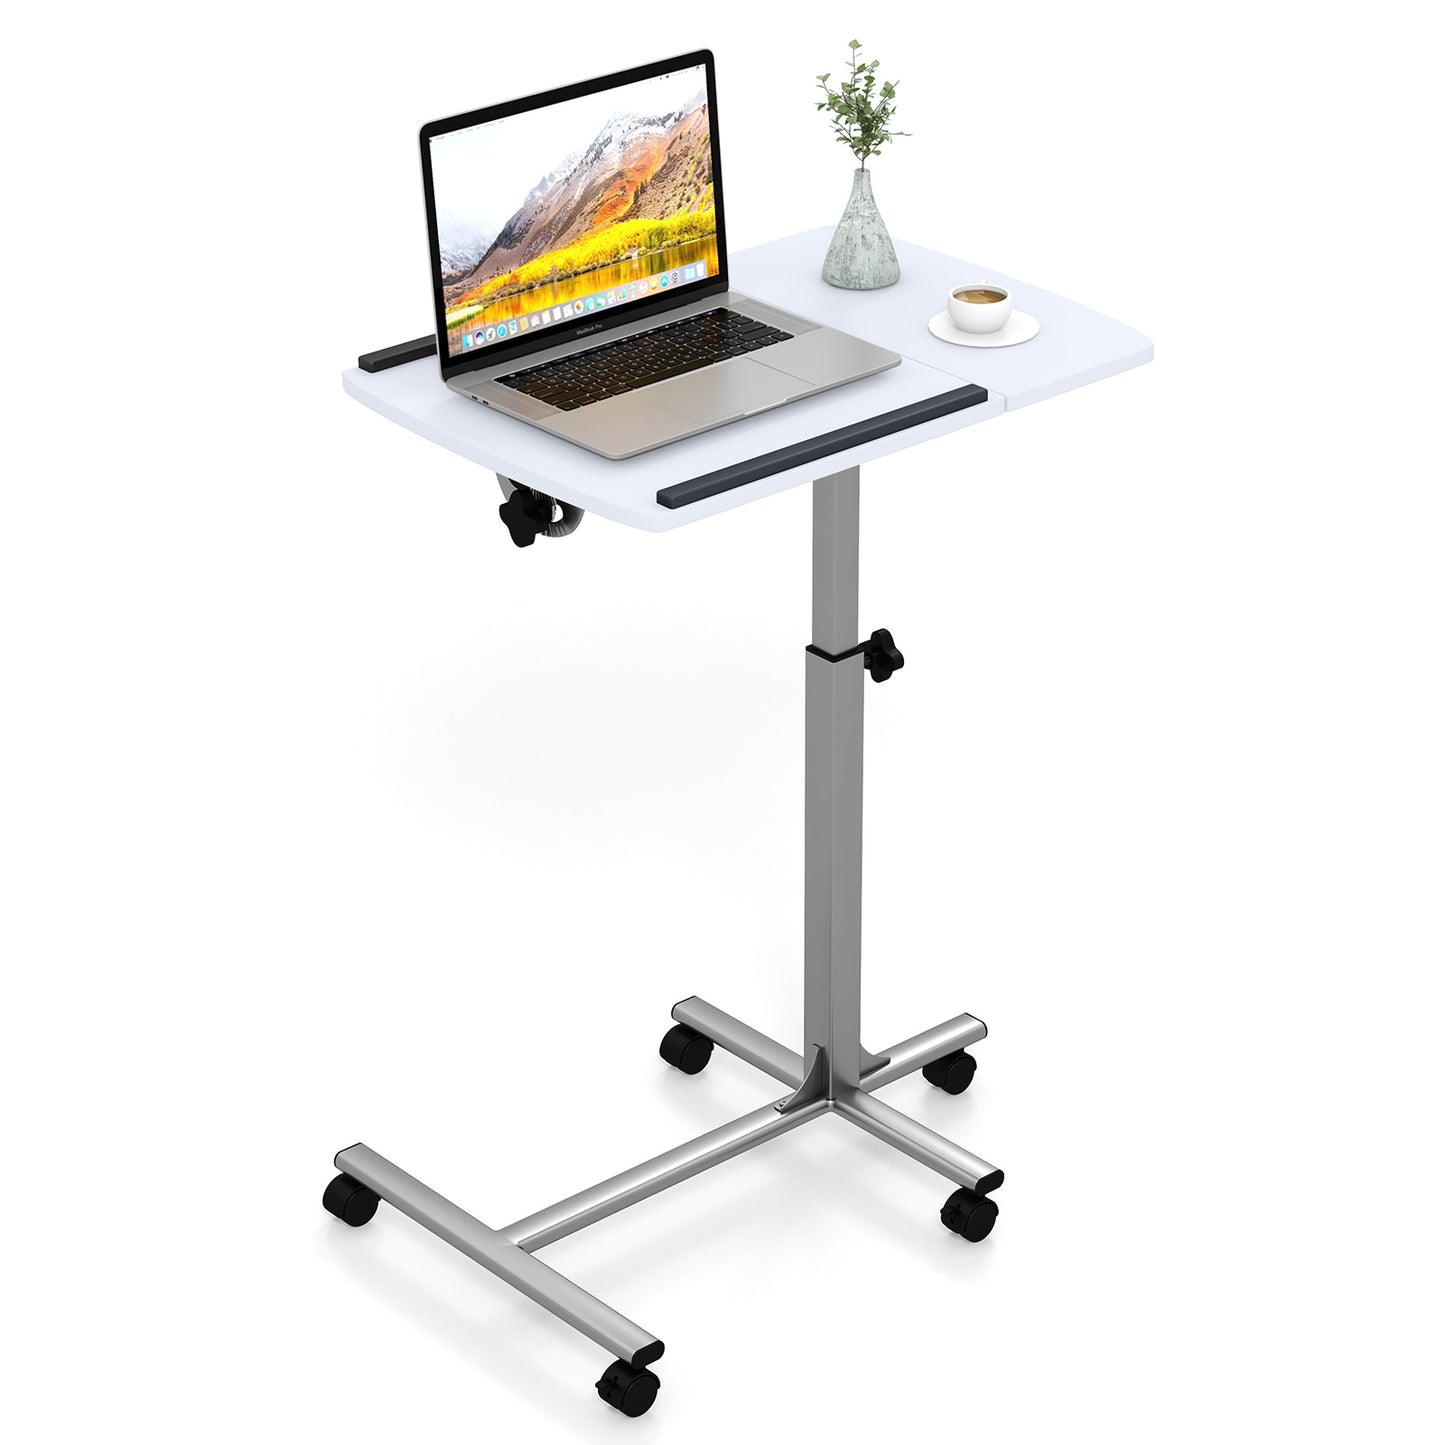 Laptop Stand, Laptop Stand for Bed, Laptop Table, Mobile Laptop Stand C-shaped with Lockable Casters, White, Costway, 3